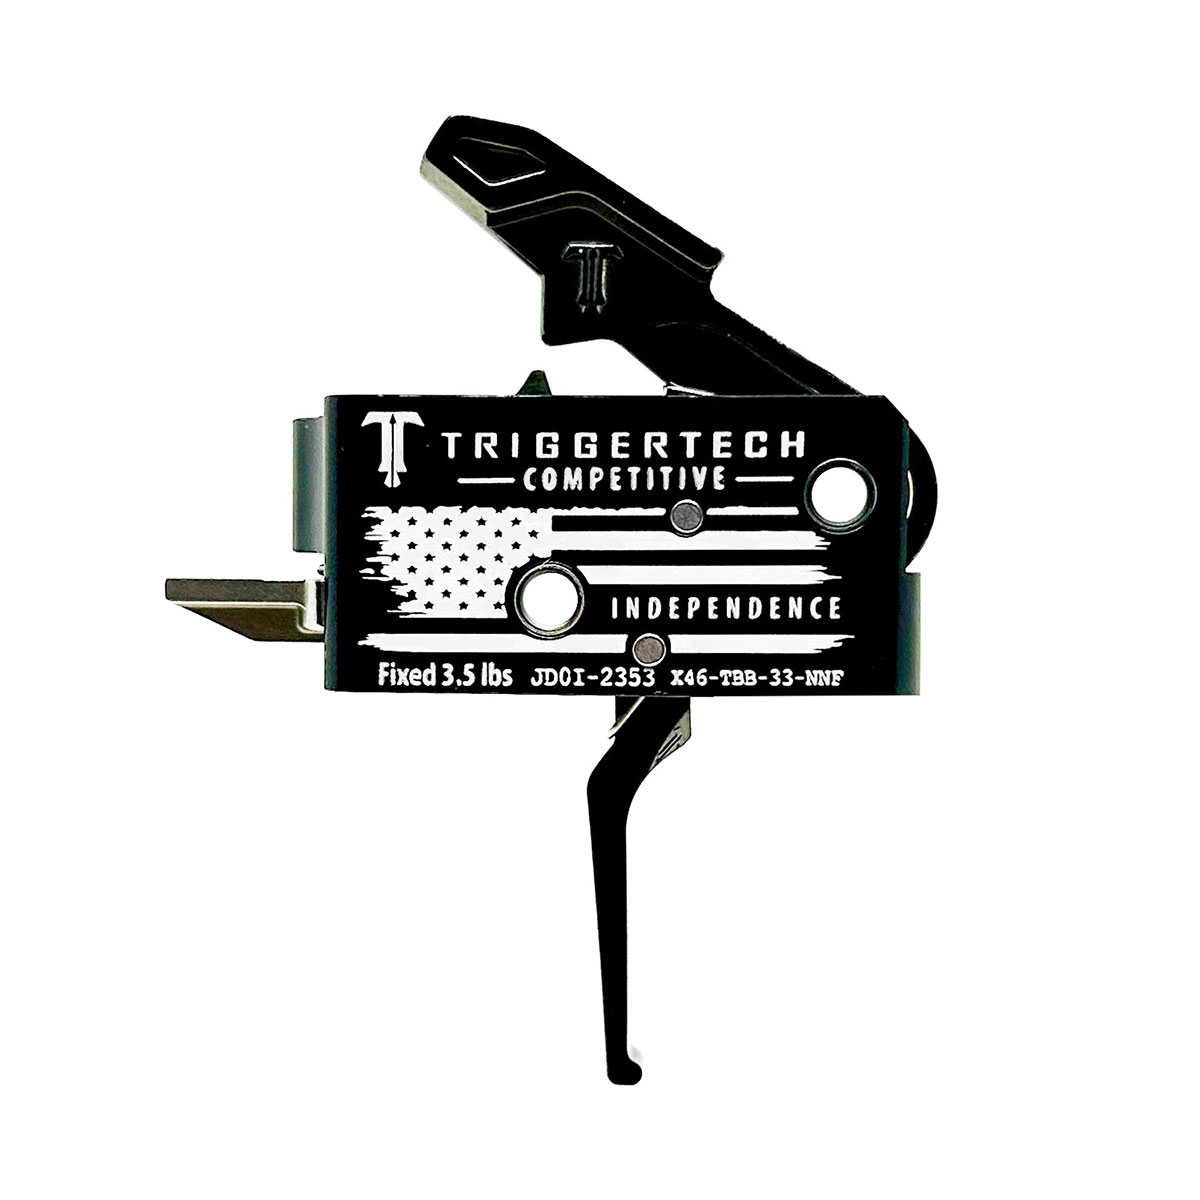 TRIGGERTECH - INDEPENDENCE COMPETITIVE TRIGGER FOR AR-15